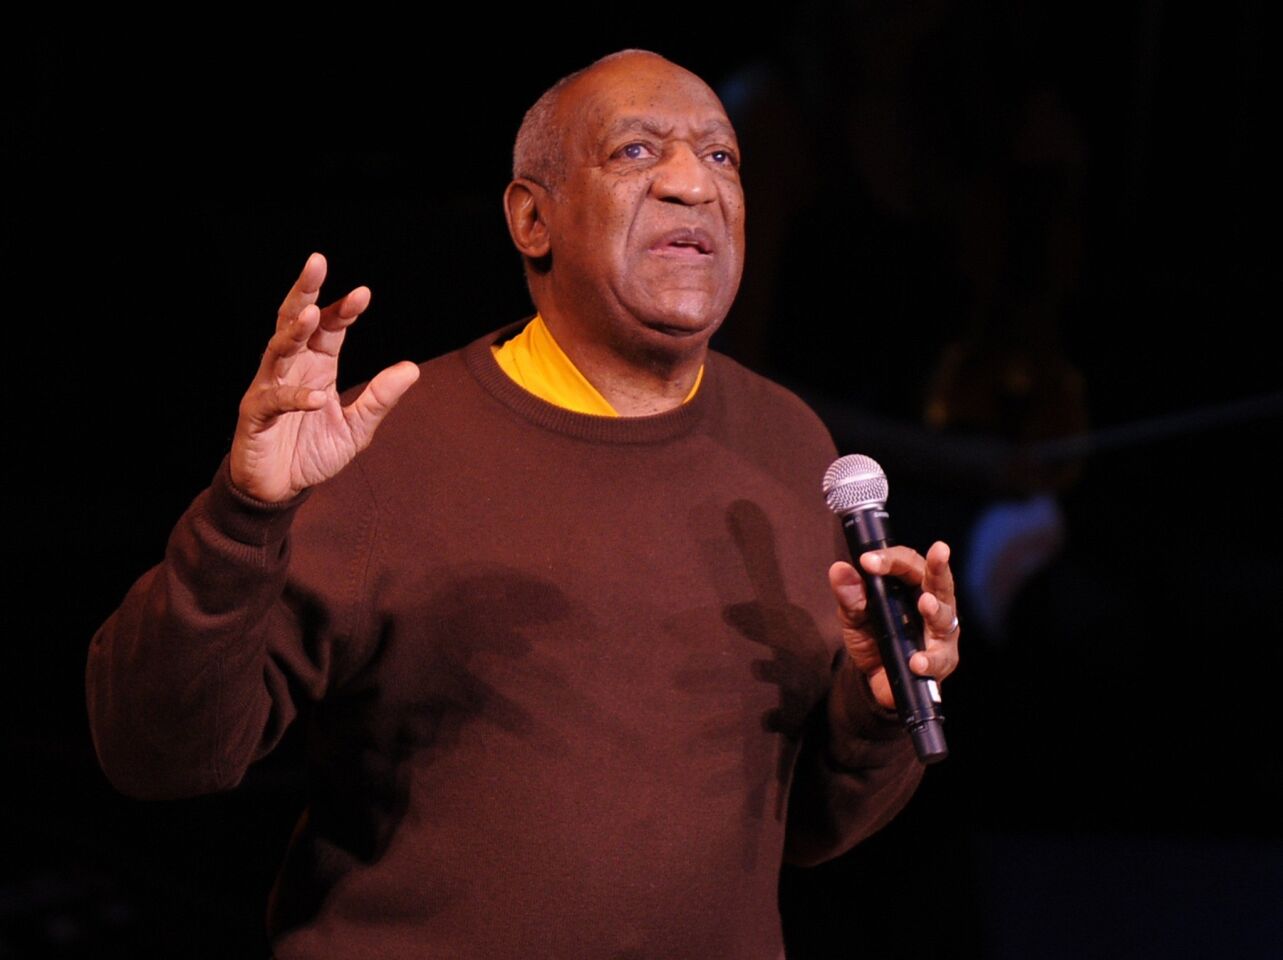 Bill Cosby (pictured in 2010) began his showbiz life as a stand-up comedian in the early 1960s. His wholesome comedy, liked by black and white audiences, was often criticized in comparison with edgy stand-ups like Richard Pryor and Lenny Bruce.